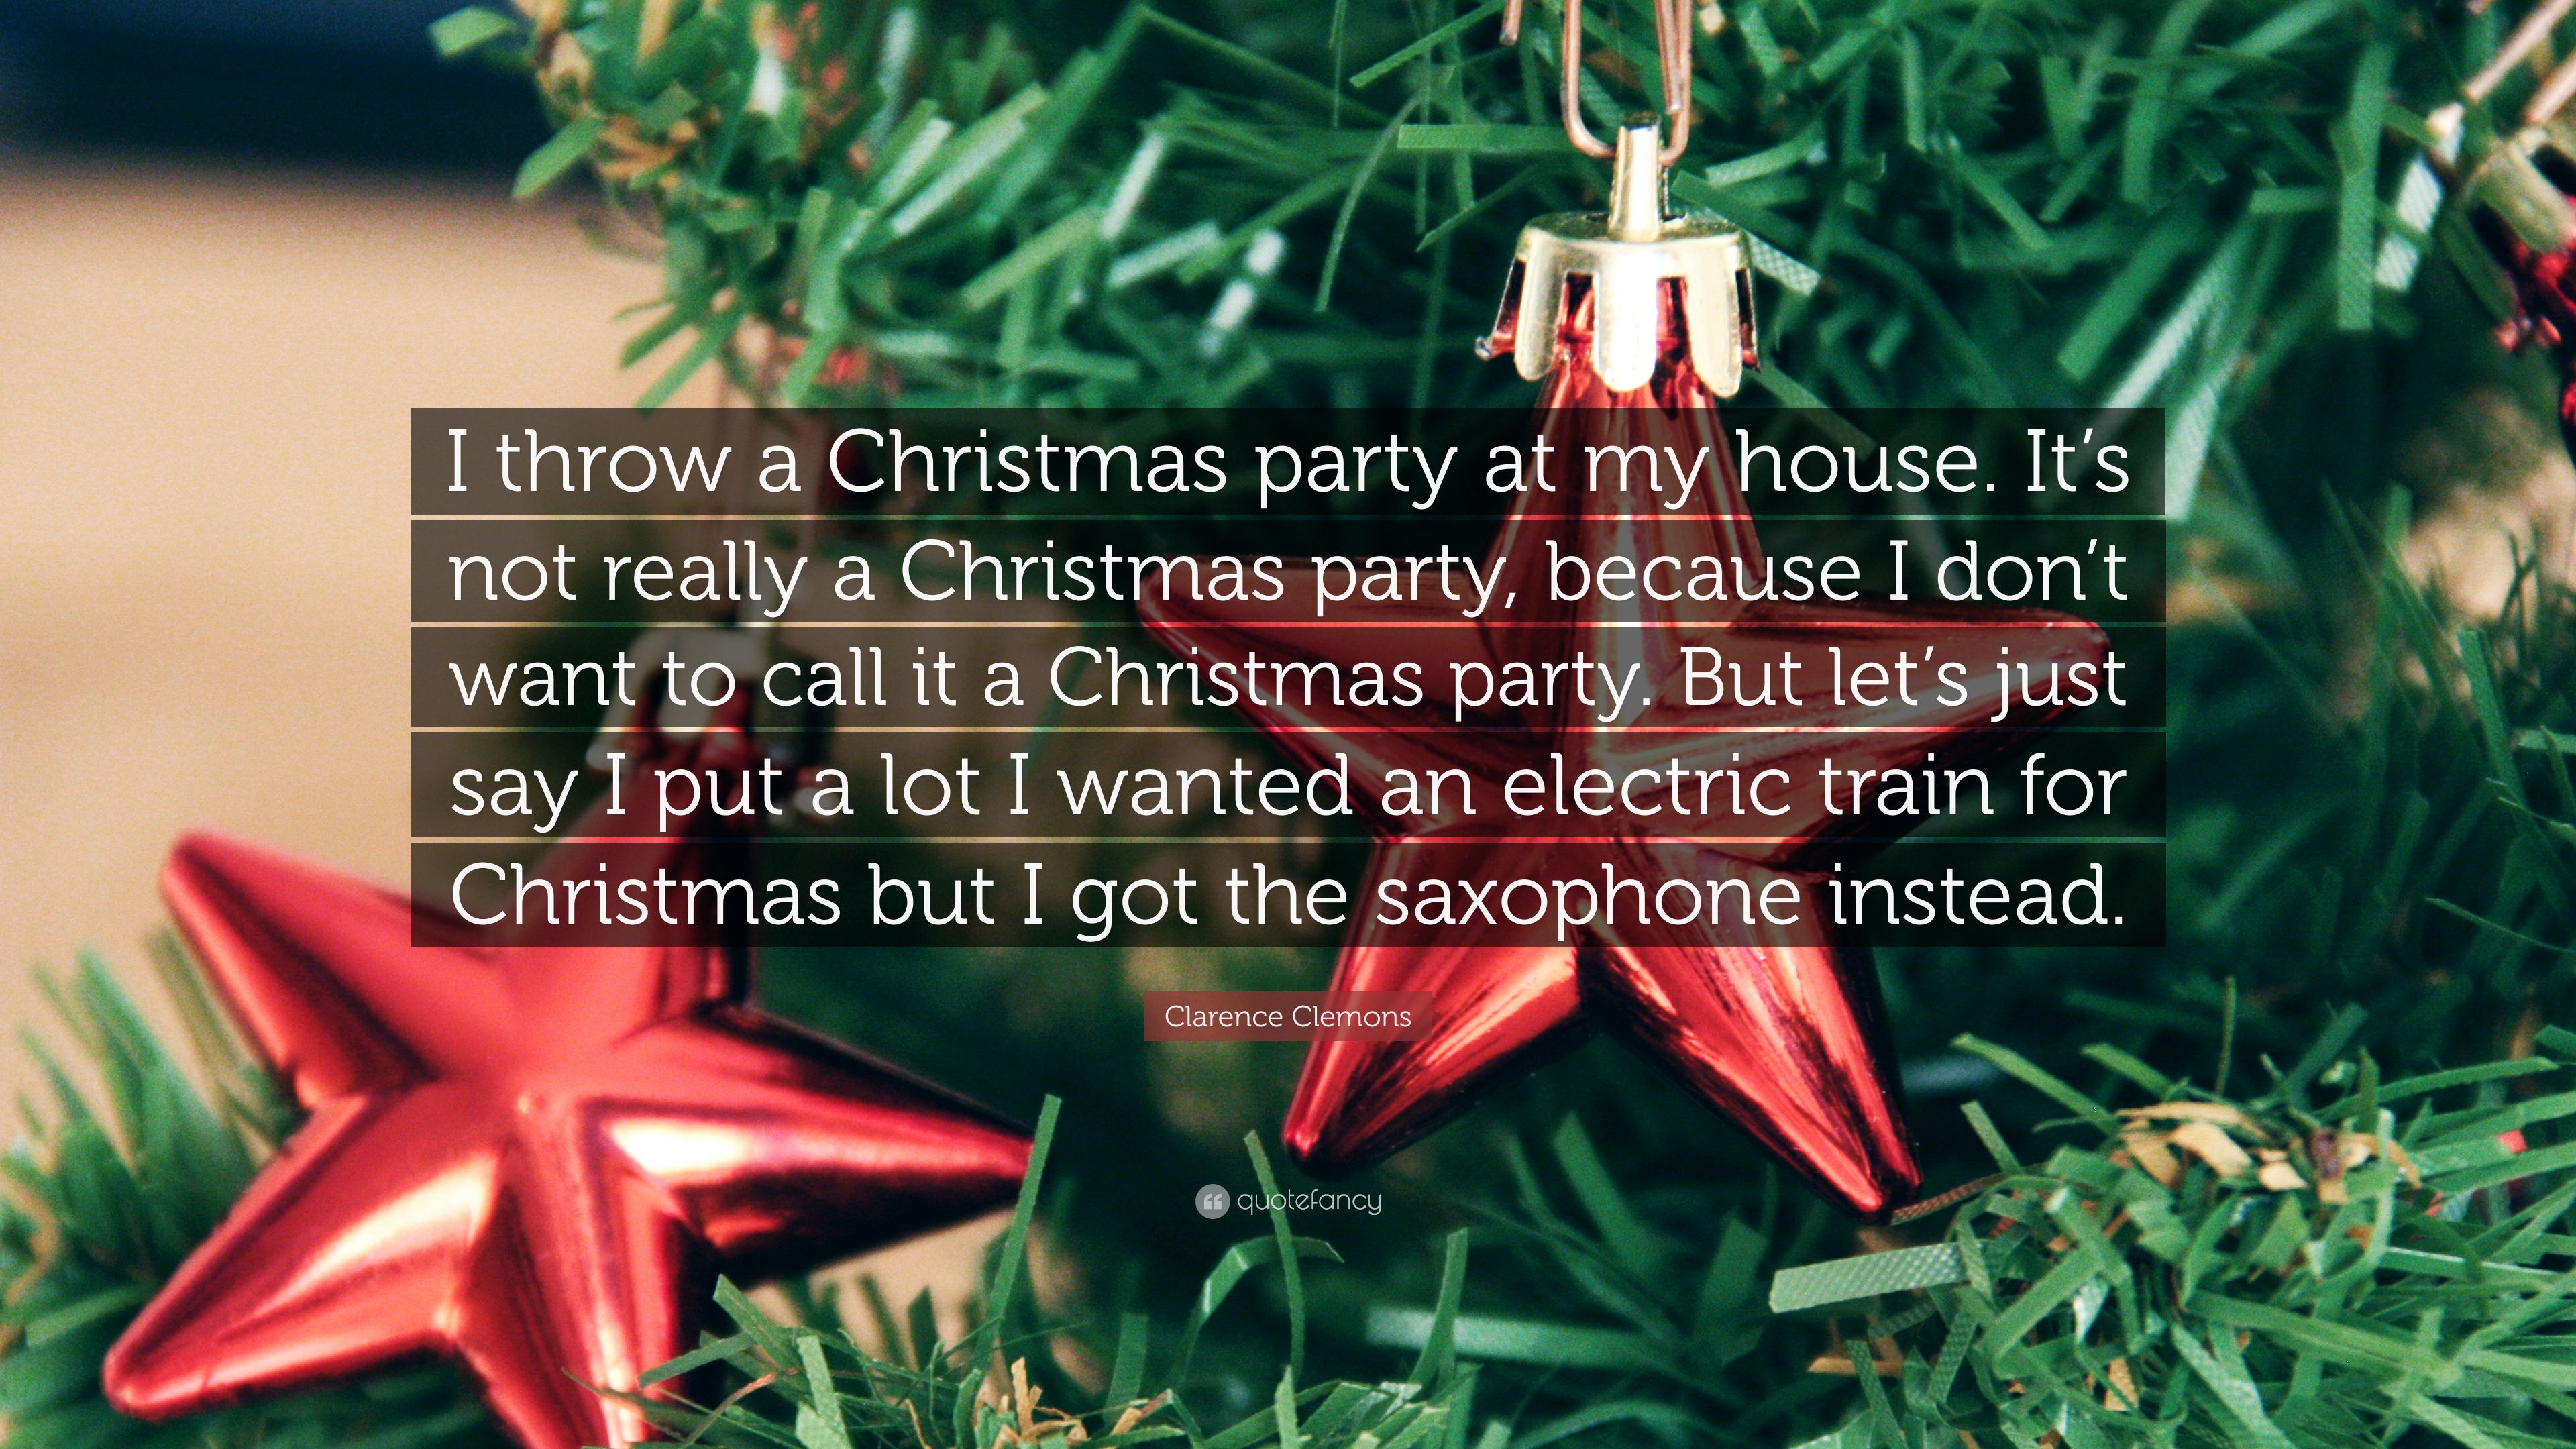 Clarence Clemons Quote: “I throw a Christmas party at my house. It's